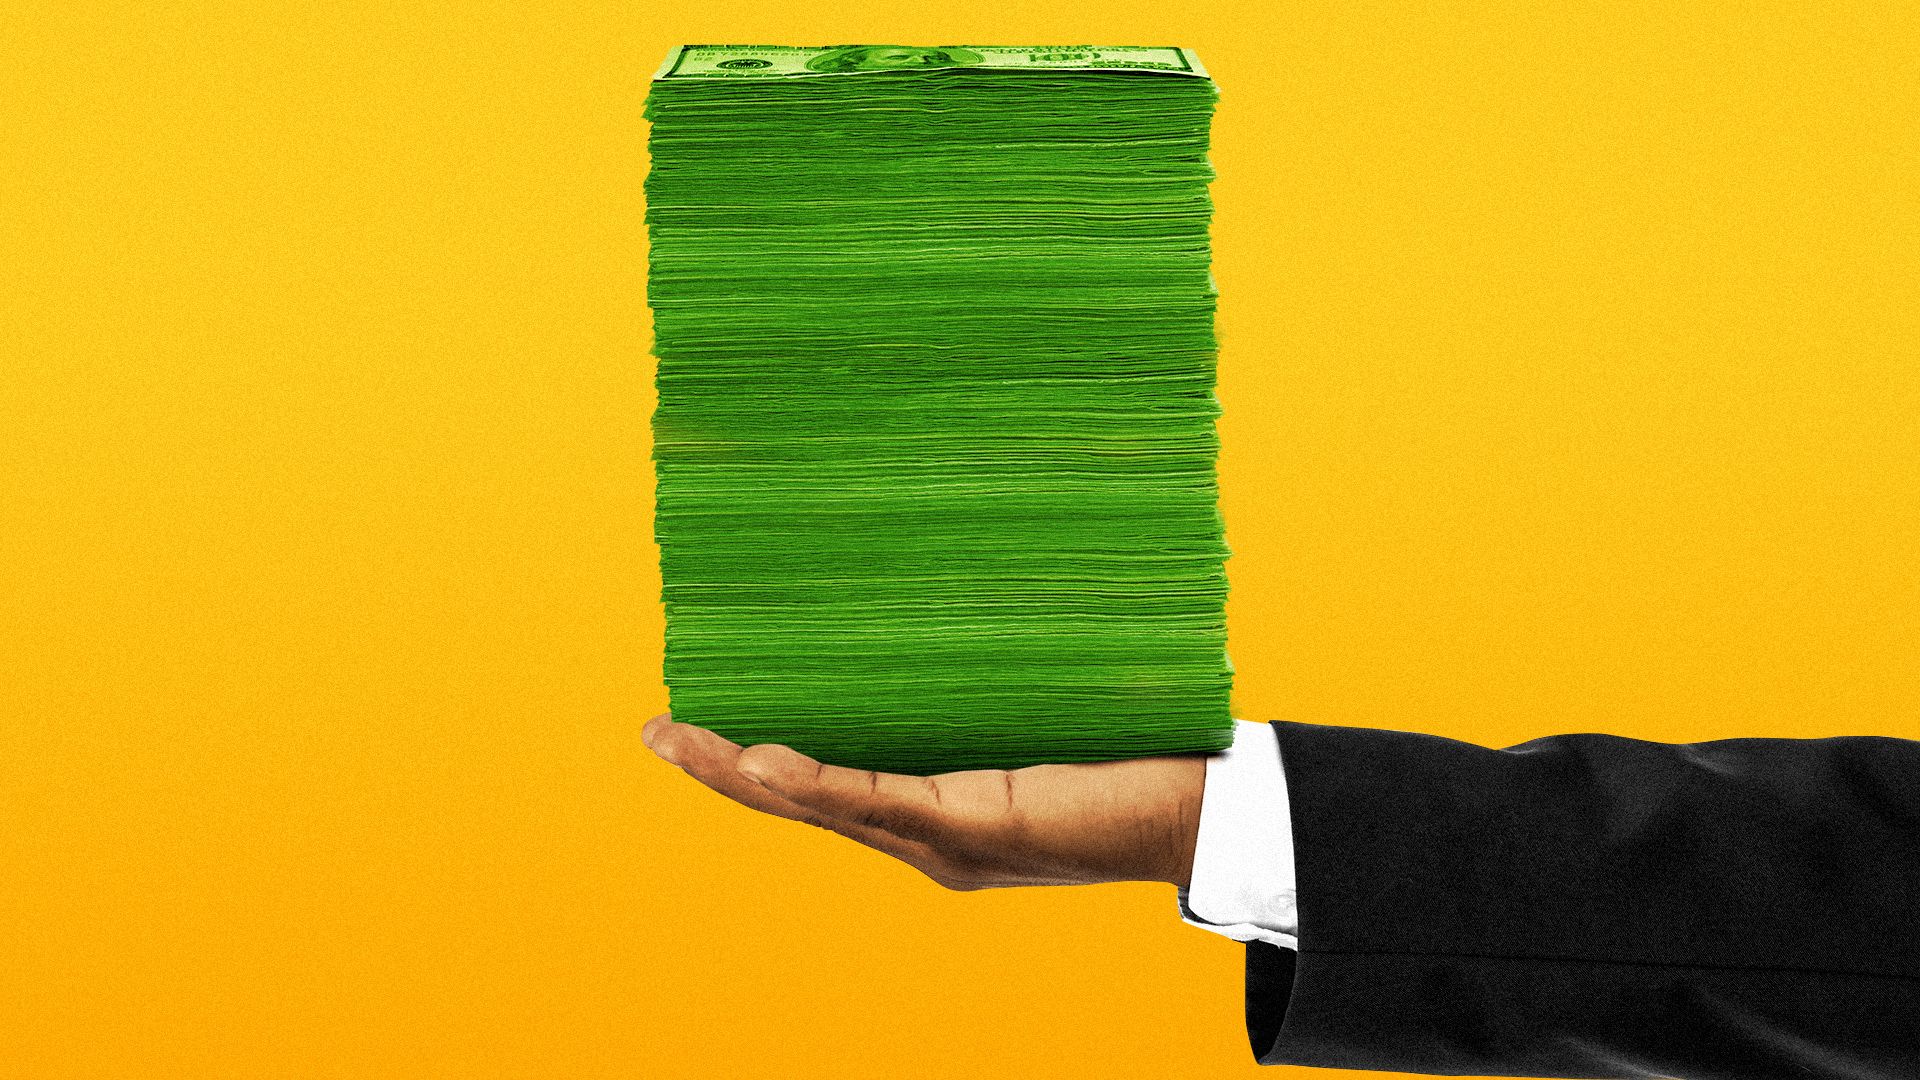 Illustration of a hand holding a very large stack of money.